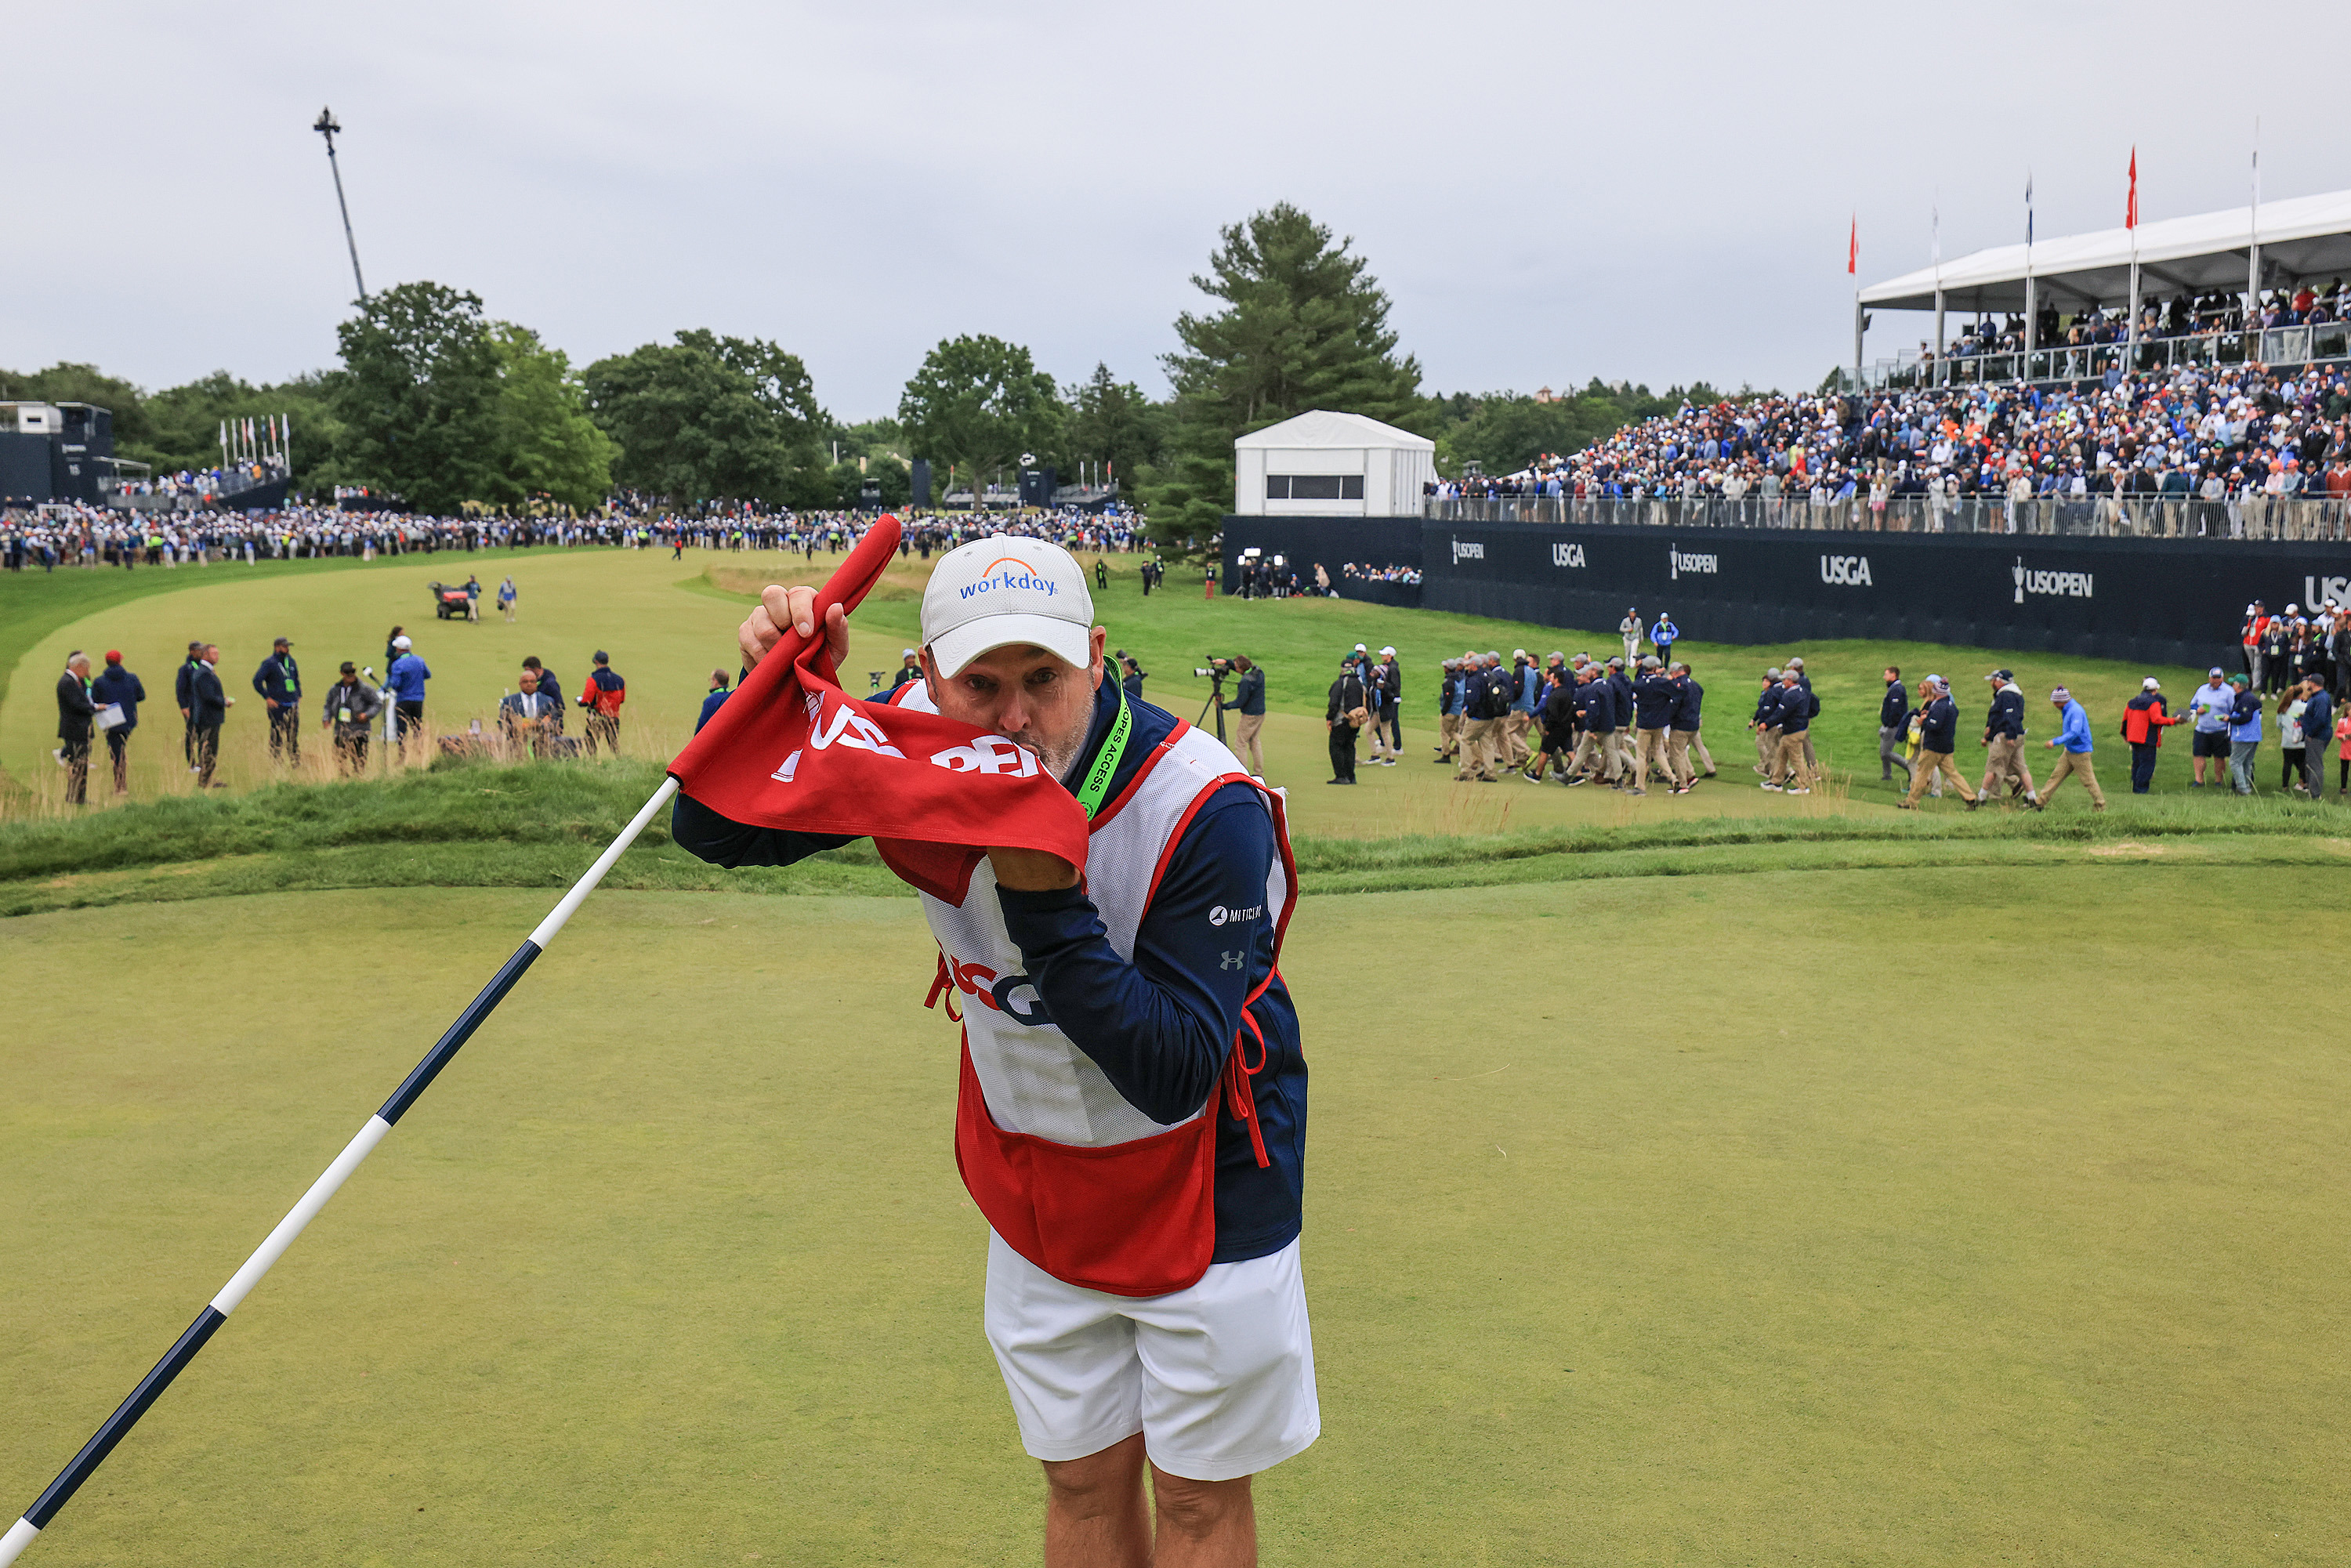 Billy Foster the caddie of US Open champion Matthew Fitzpatrick kisses the flag on the 18th green after Fitzpatrick's one shot victory.